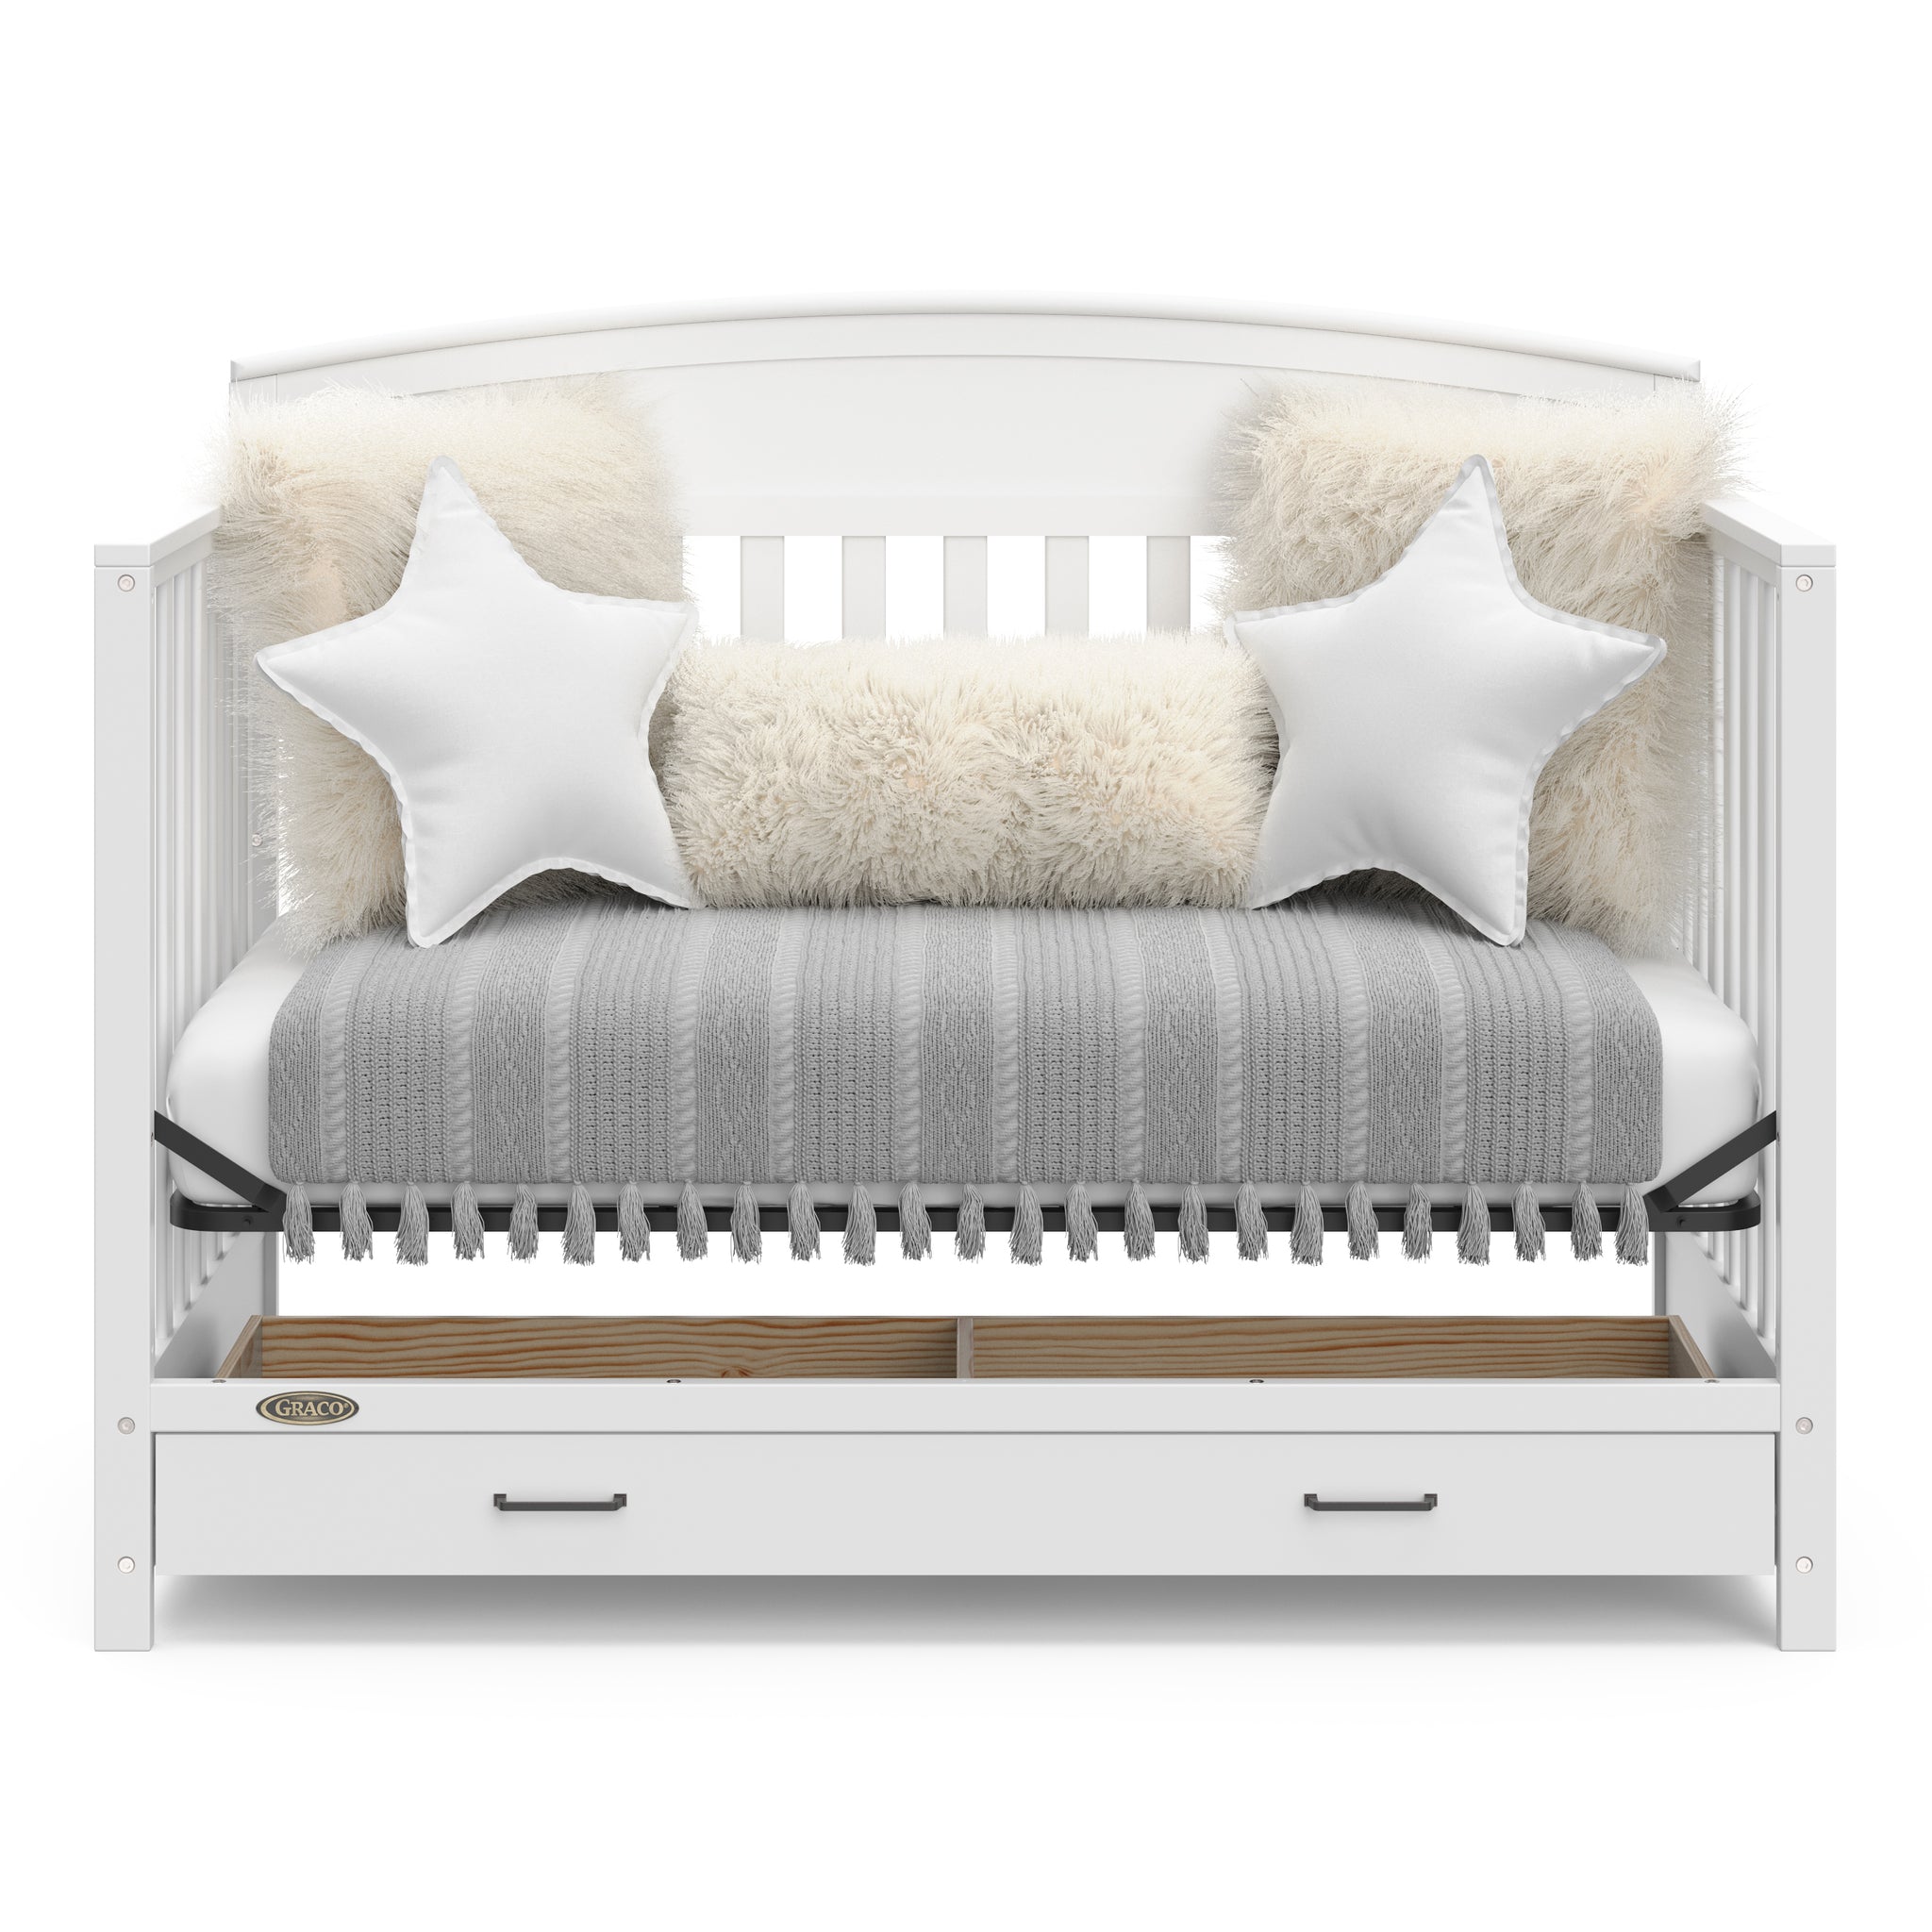 White crib with drawer in daybed conversion